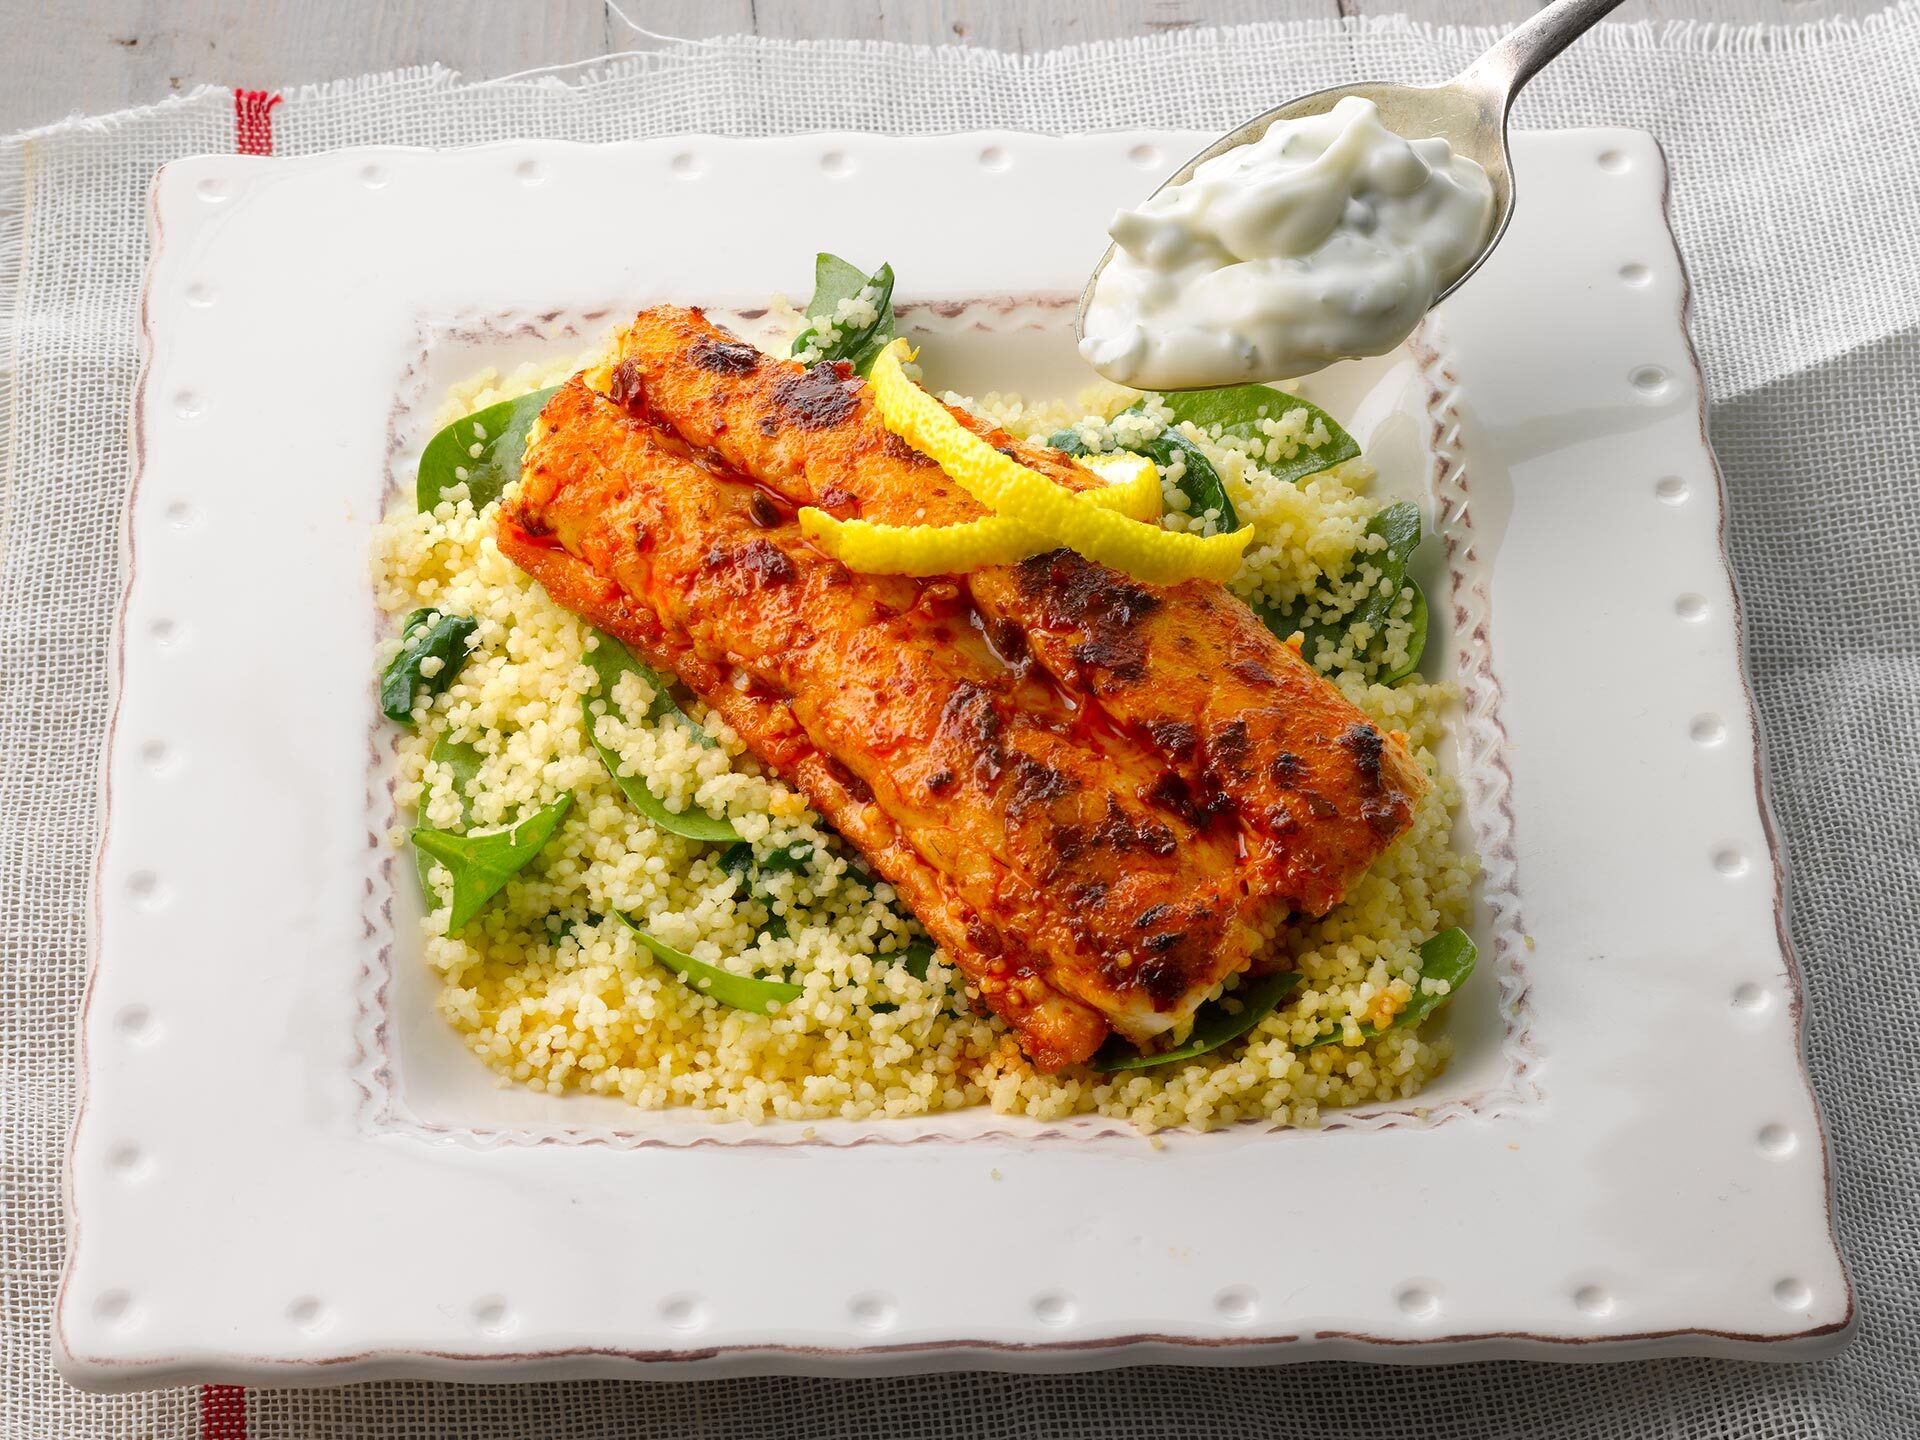 Spiced Haddock with Lemon Couscous